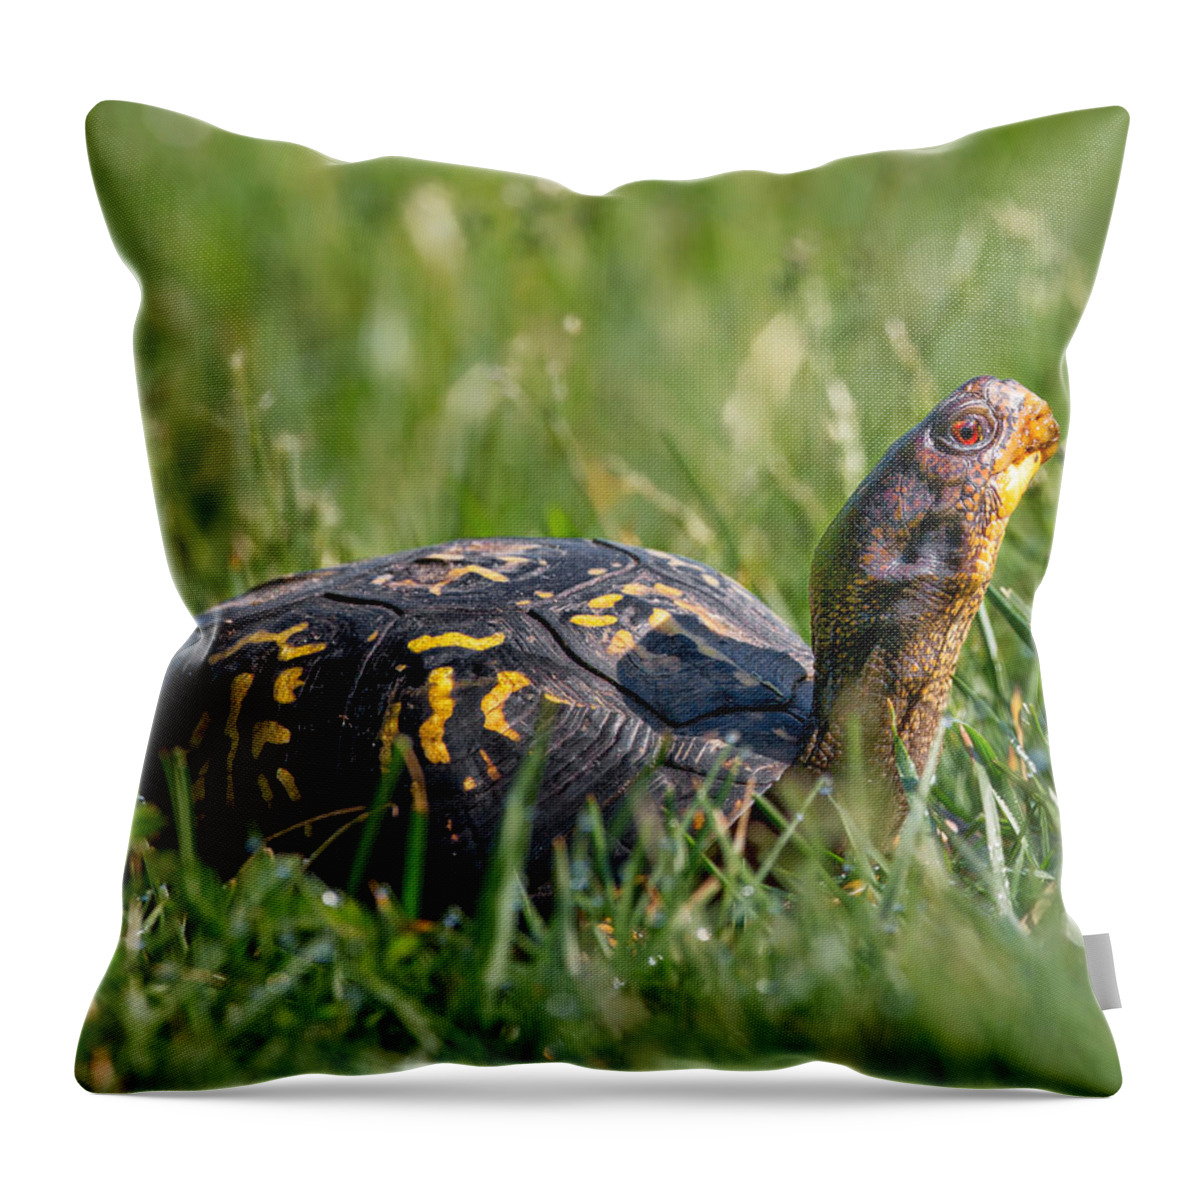 Turtle Throw Pillow featuring the photograph Eastern Box Turtle by Bill Wakeley